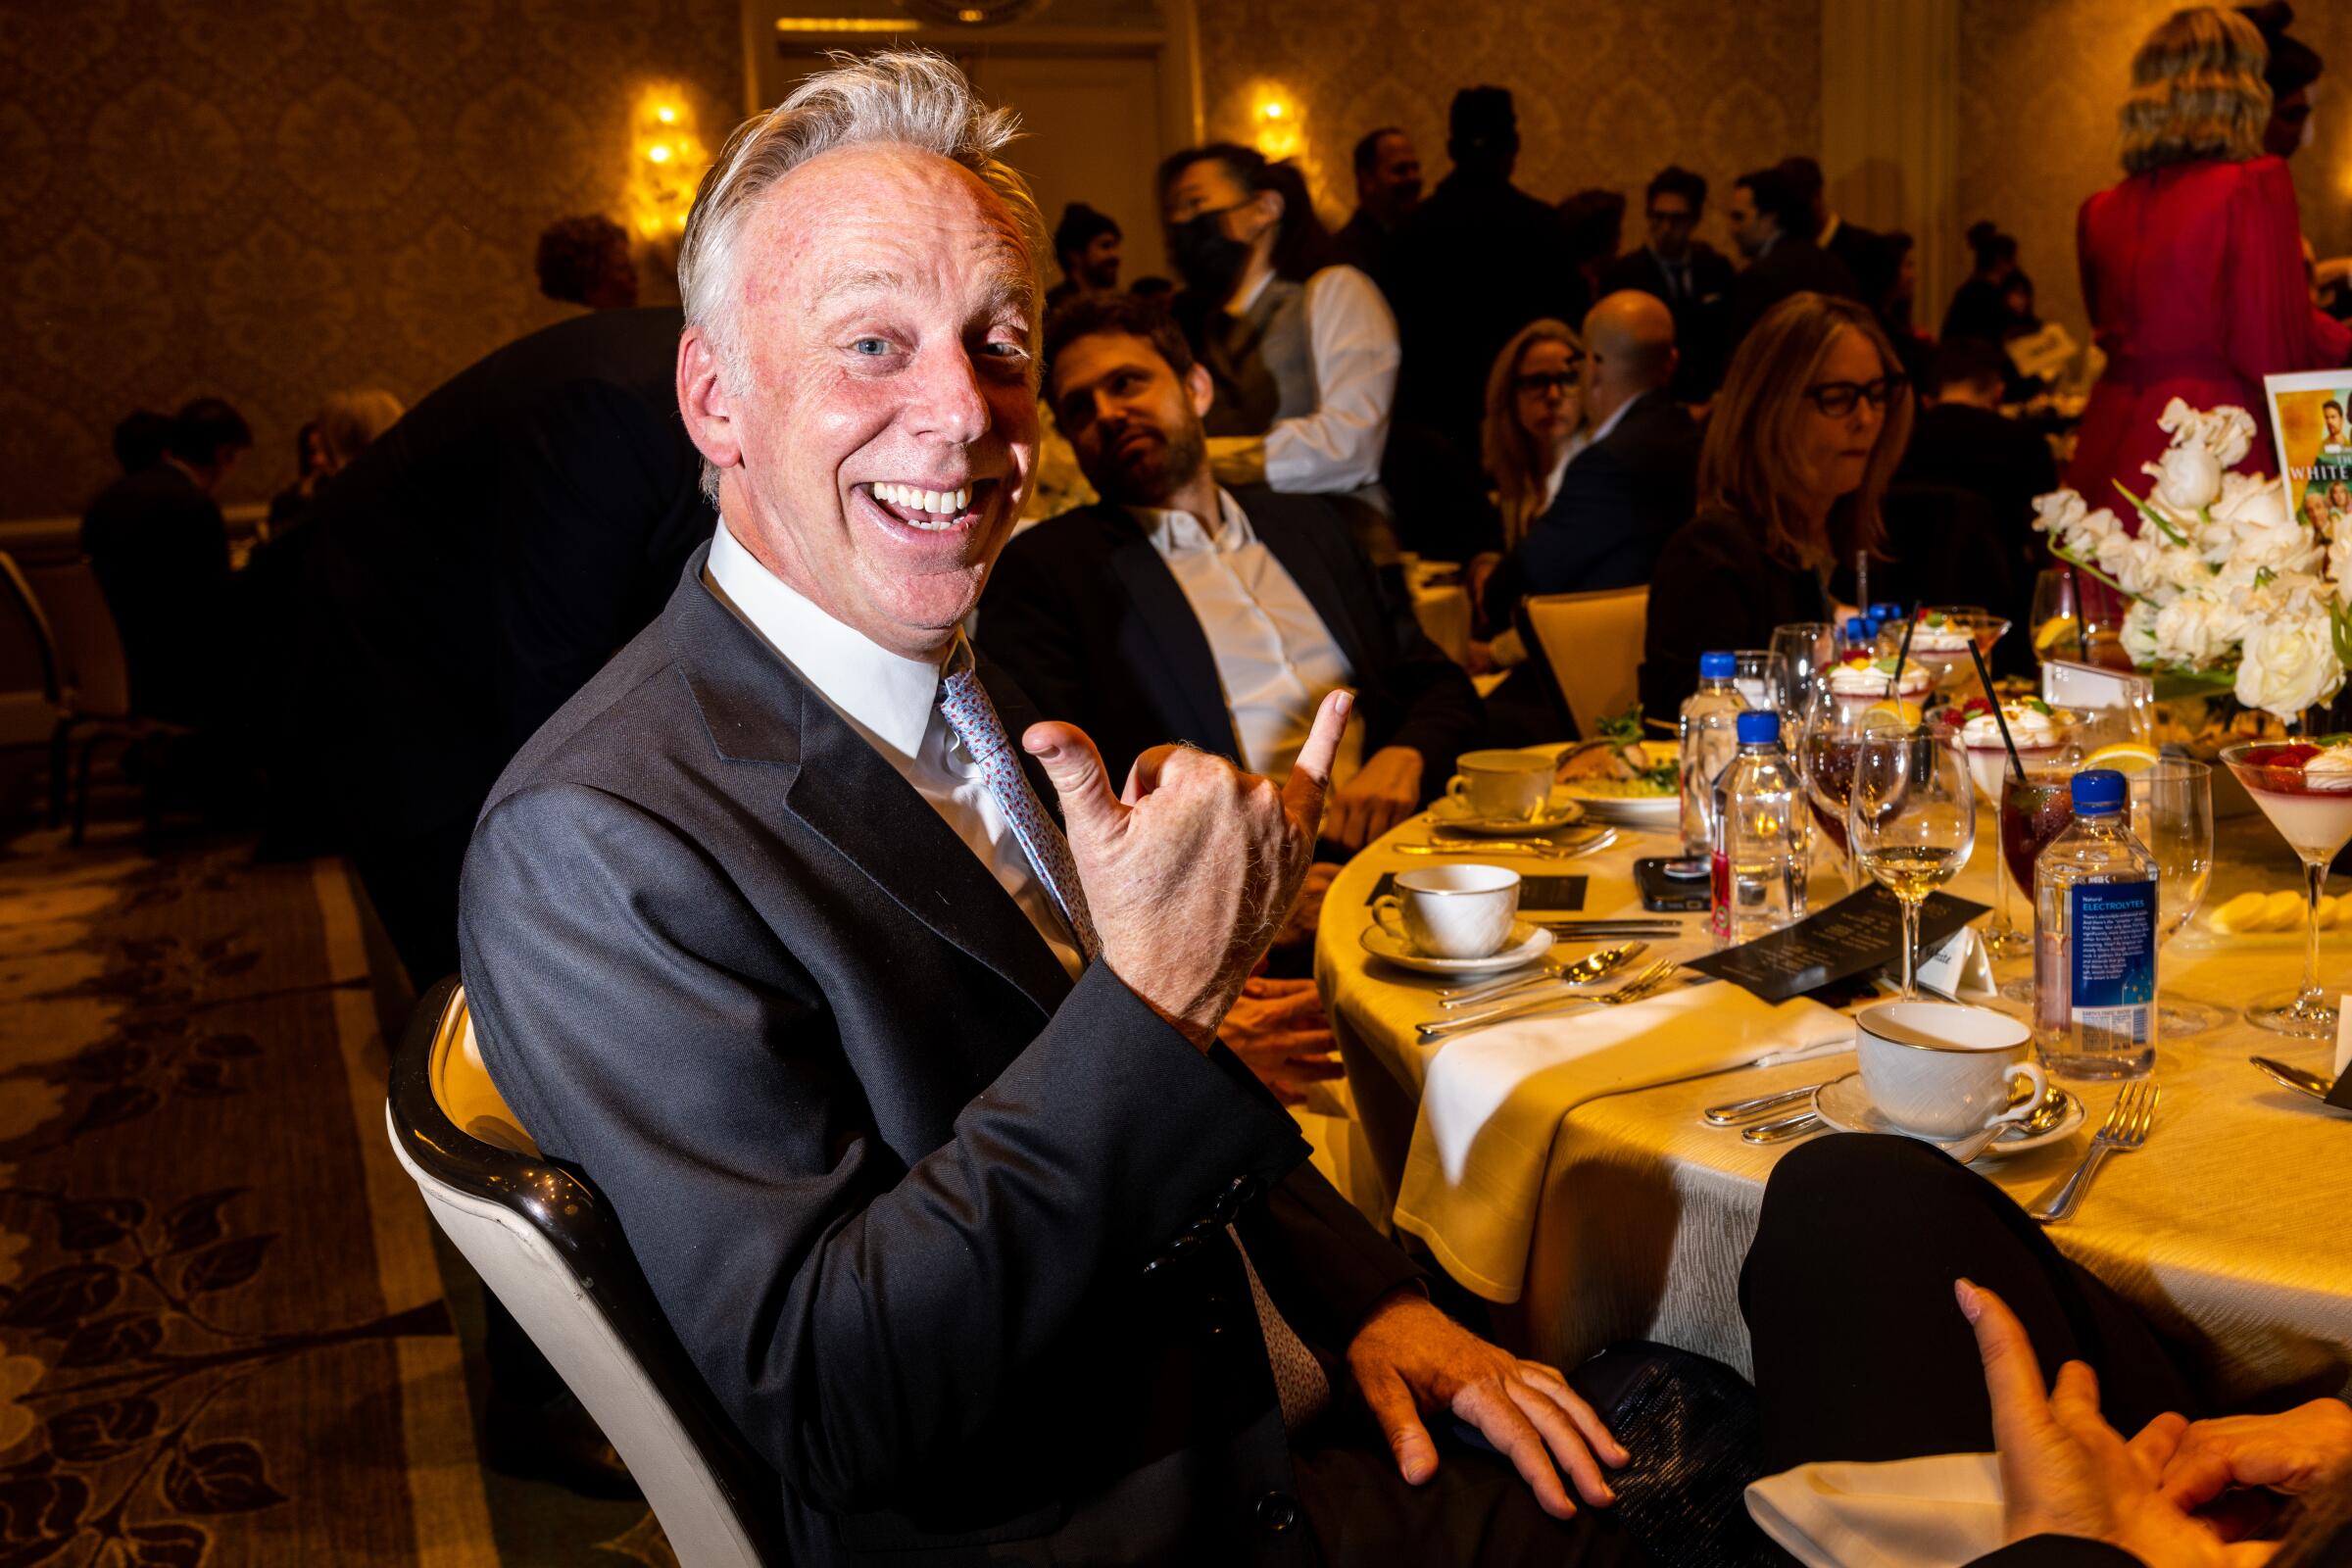 Mike White wears a suit and flashes a thumbs up while at a dinner event.